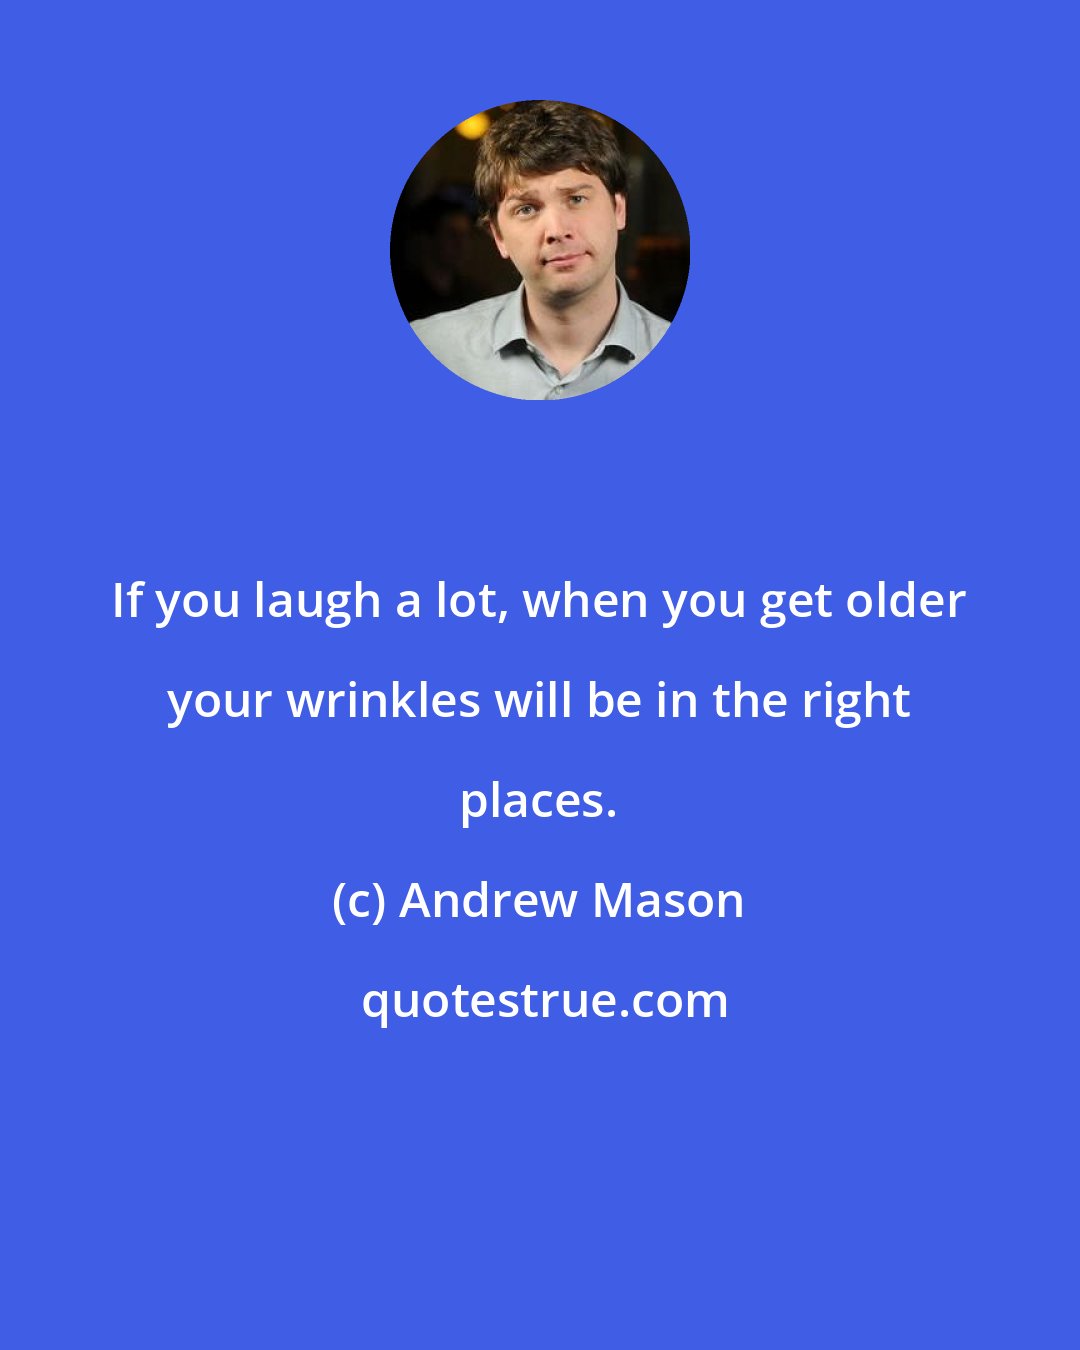 Andrew Mason: If you laugh a lot, when you get older your wrinkles will be in the right places.